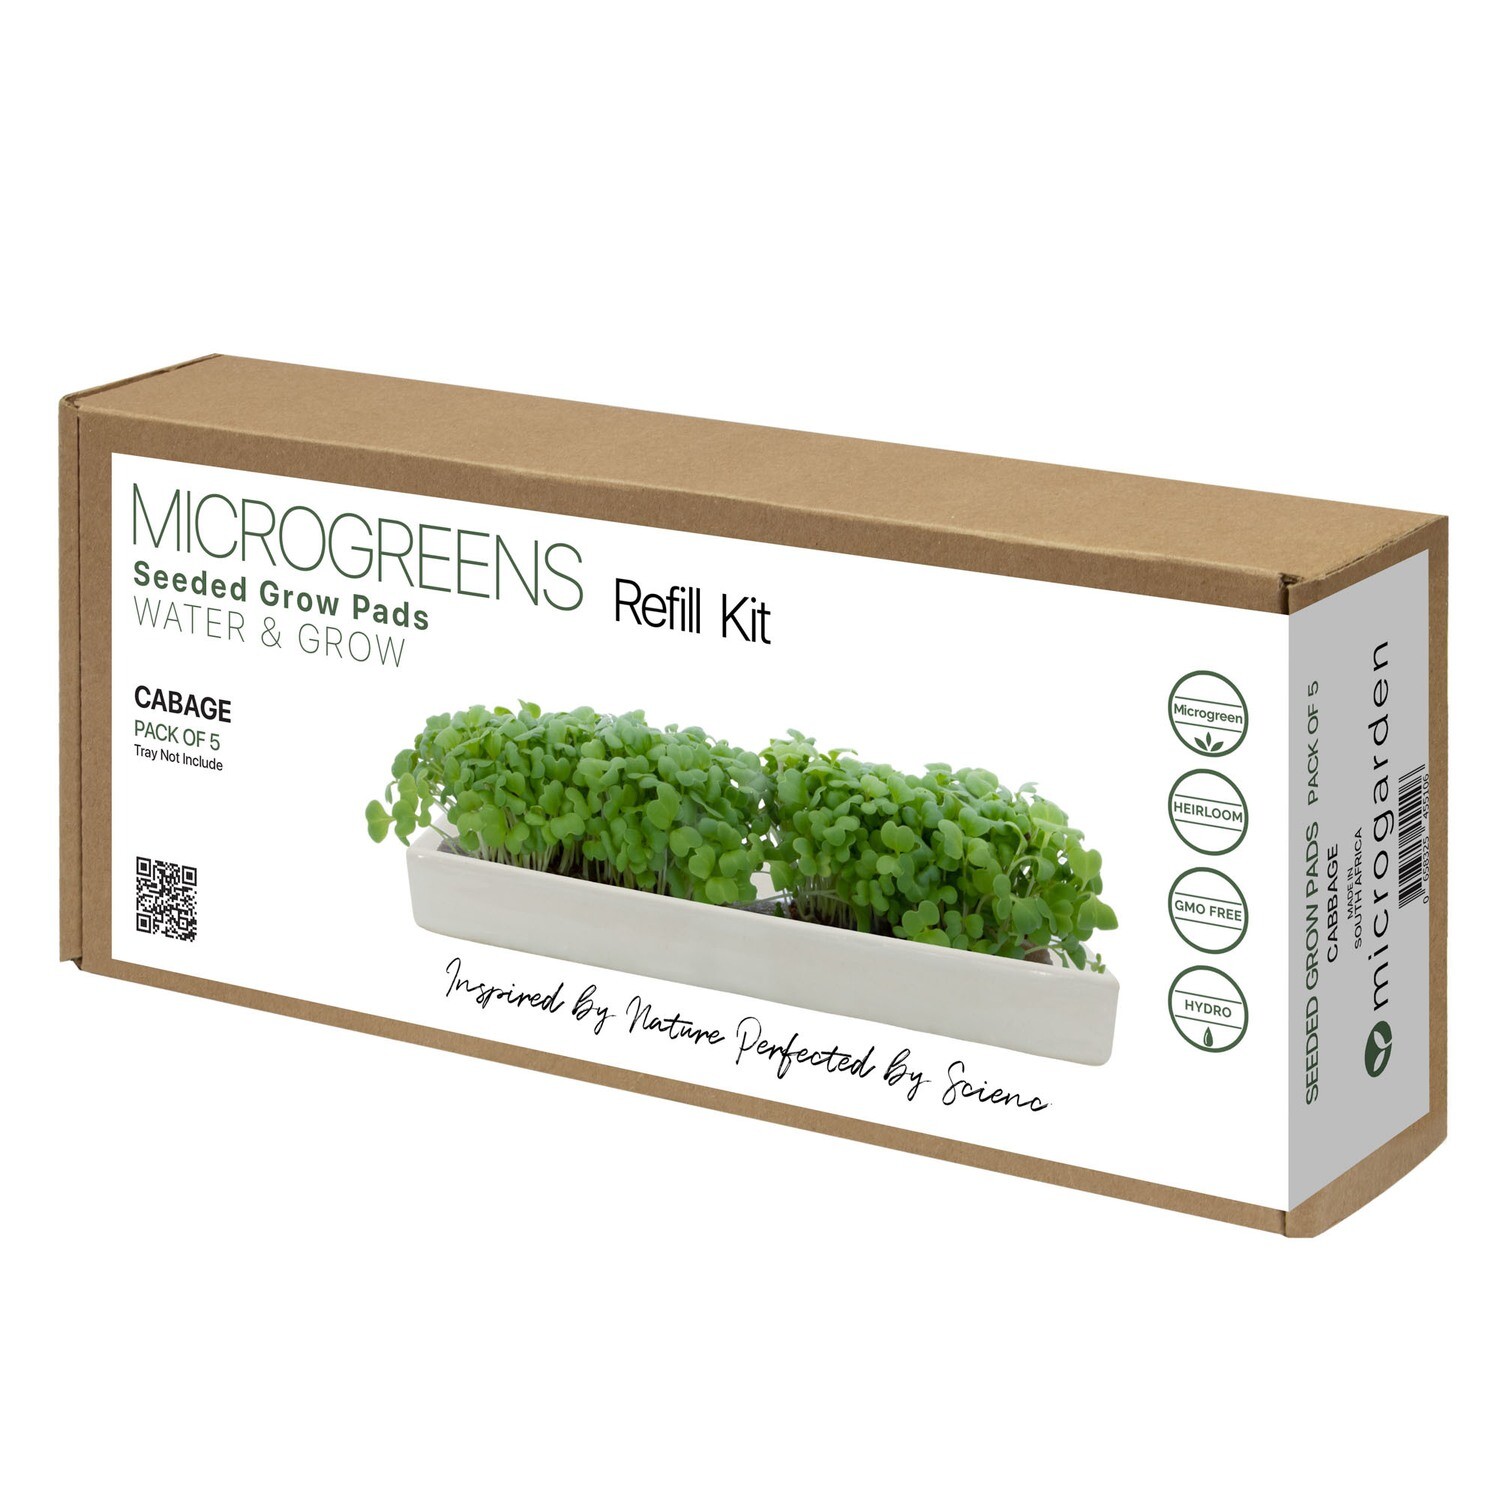 Microgreens Seeded Grow Pads - Refill - Cabage - Pack of 5